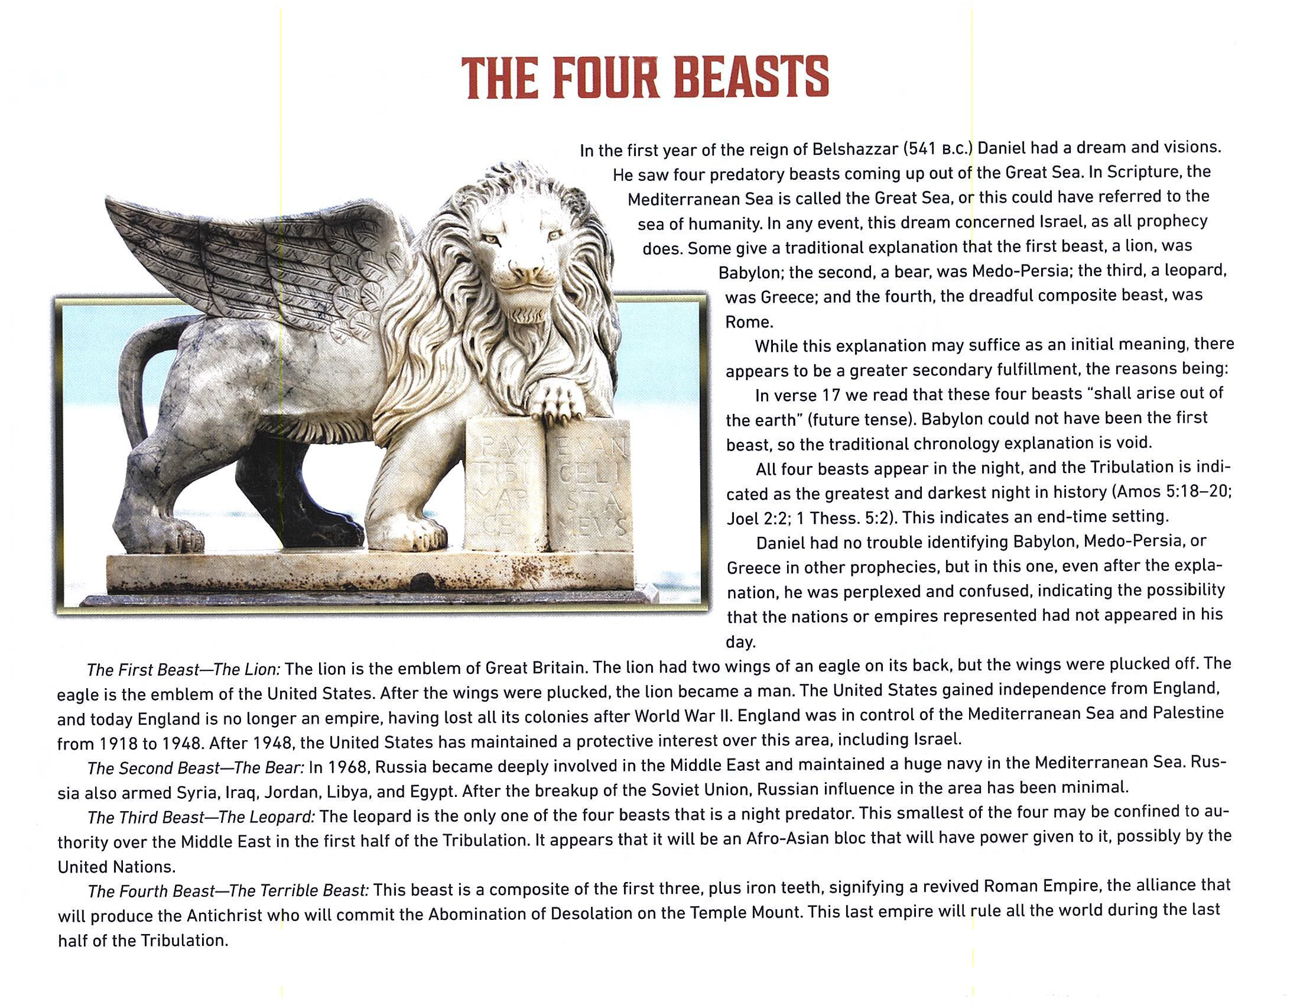 2021 Prophecy Calendar: July - The Four Beasts